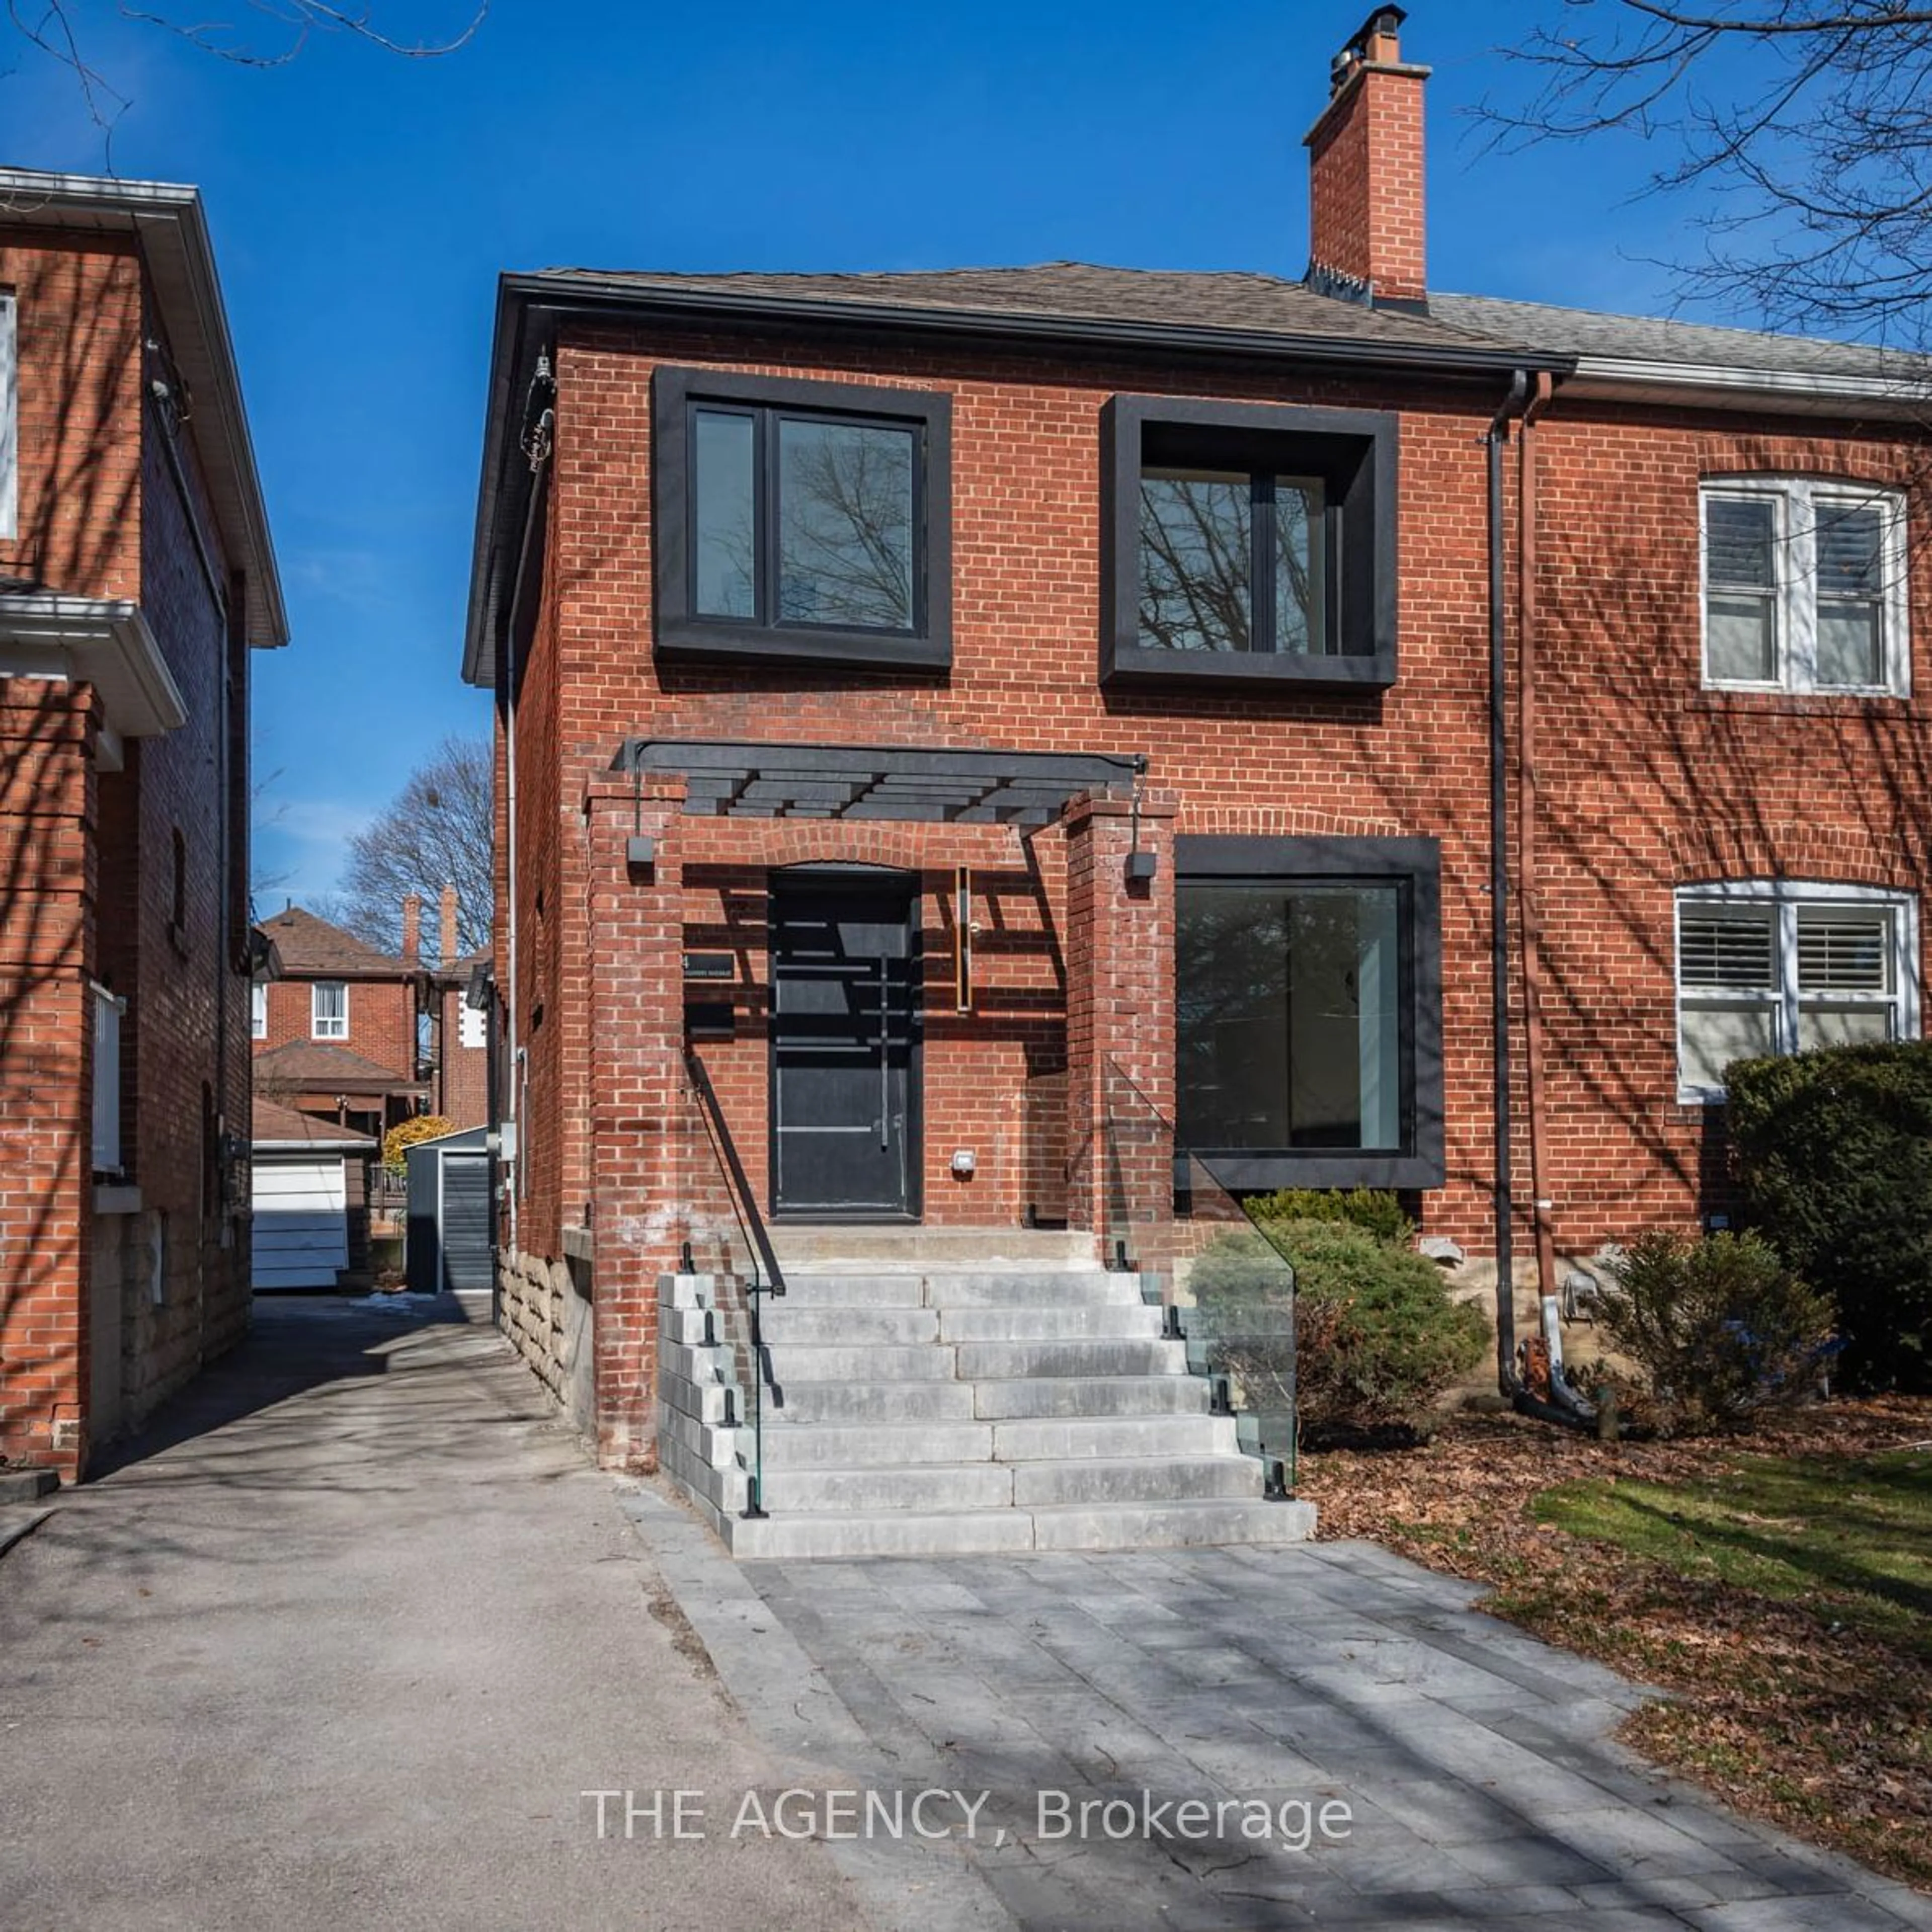 Home with brick exterior material for 44 Glengarry Ave, Toronto Ontario M5M 1C9